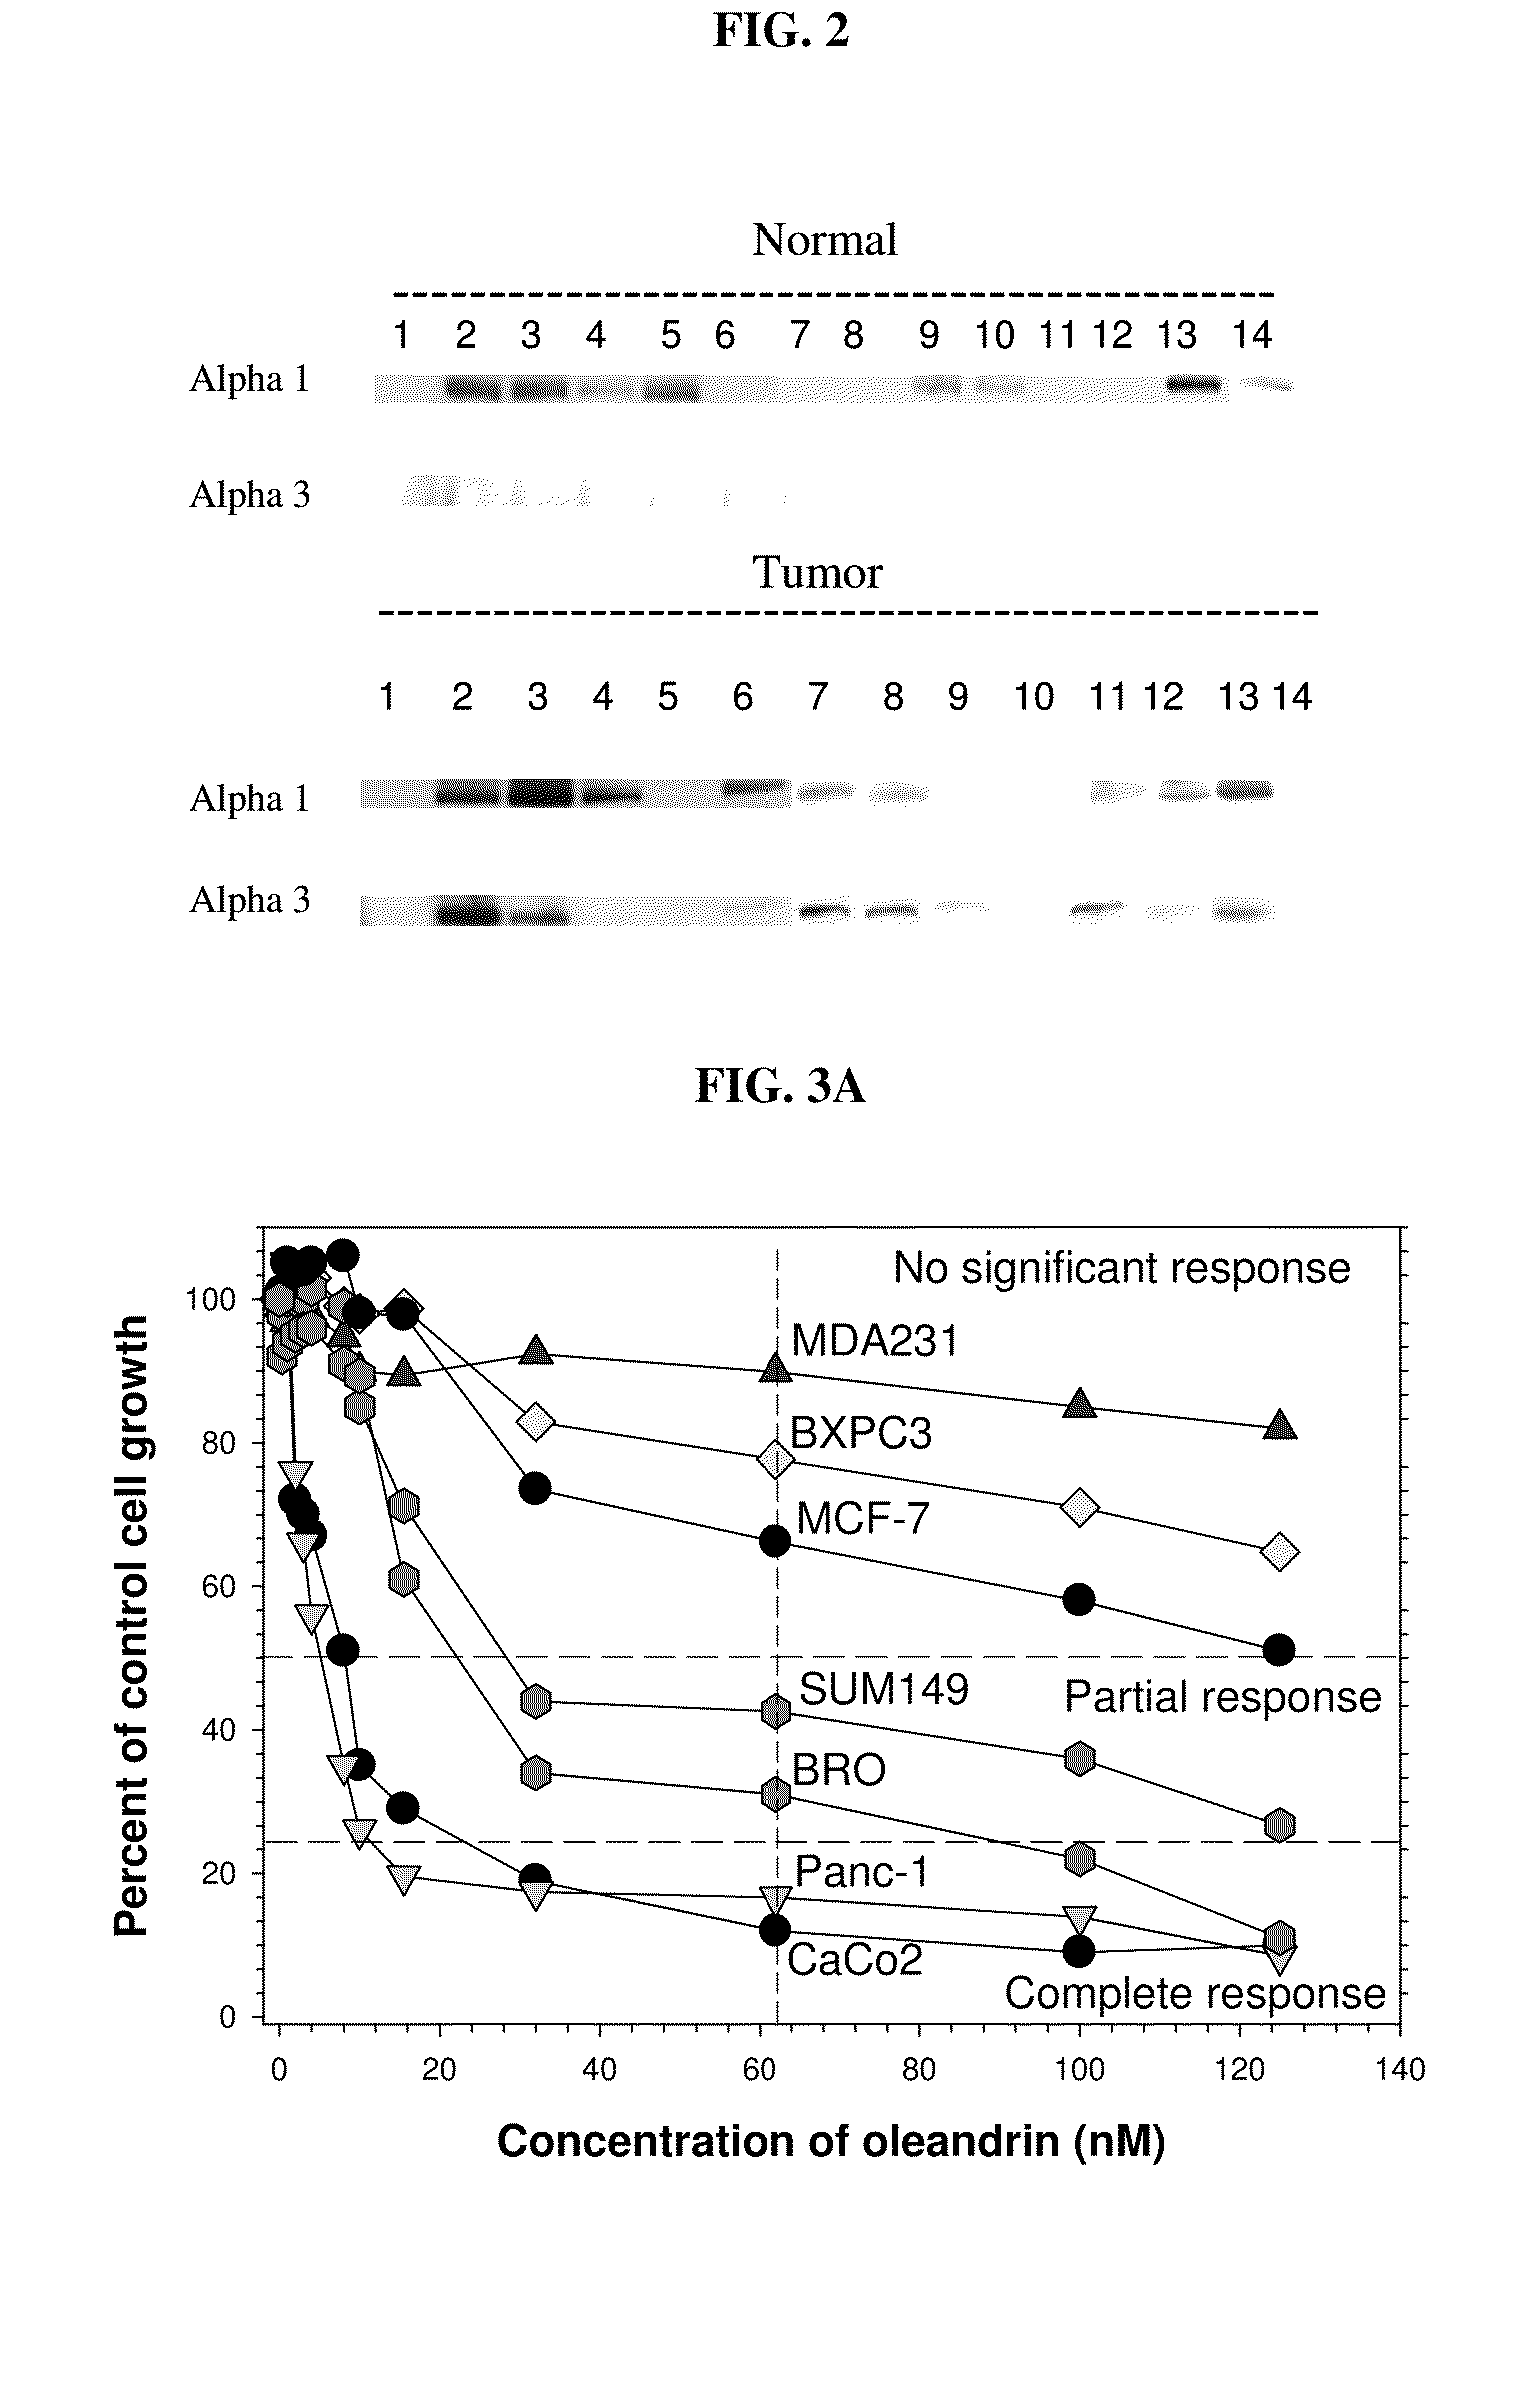 Method of Determining the Probability of a Therapeutic Response in Cancer Chemotherapy With Cardiac Glycoside